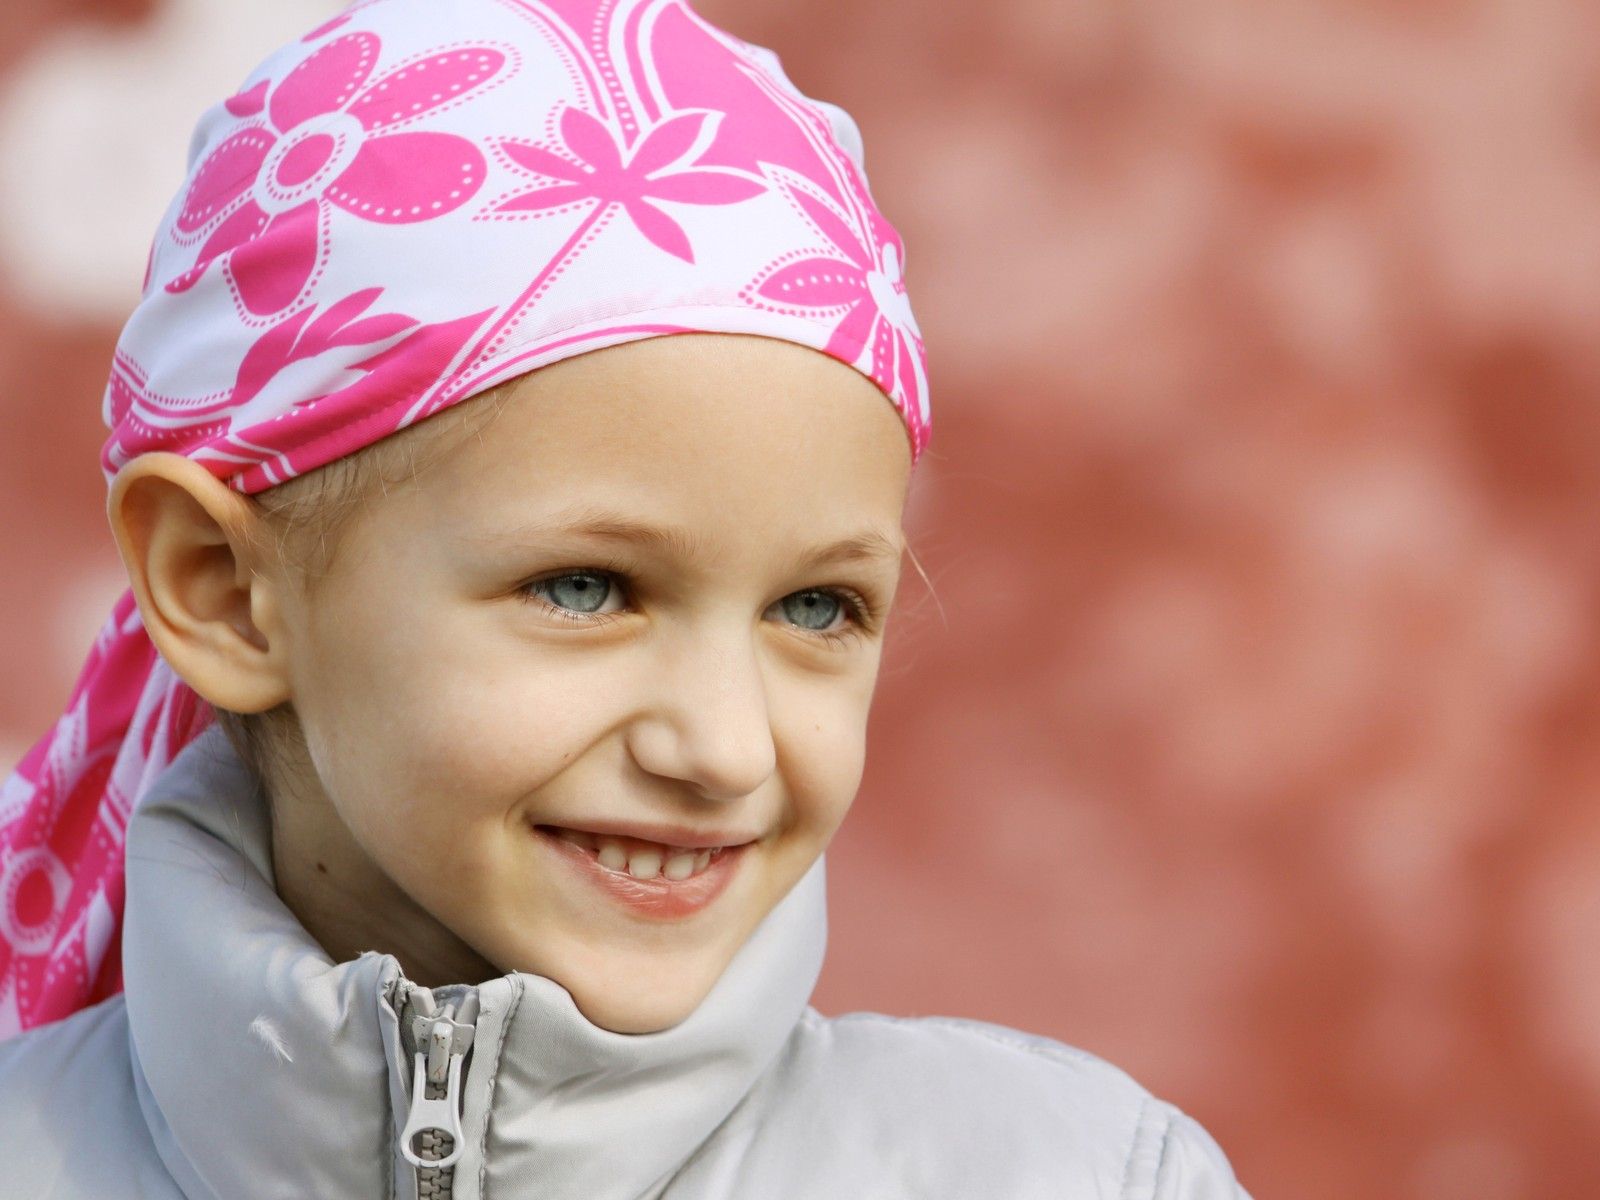 leukemia is the most common cancer in children under 15.